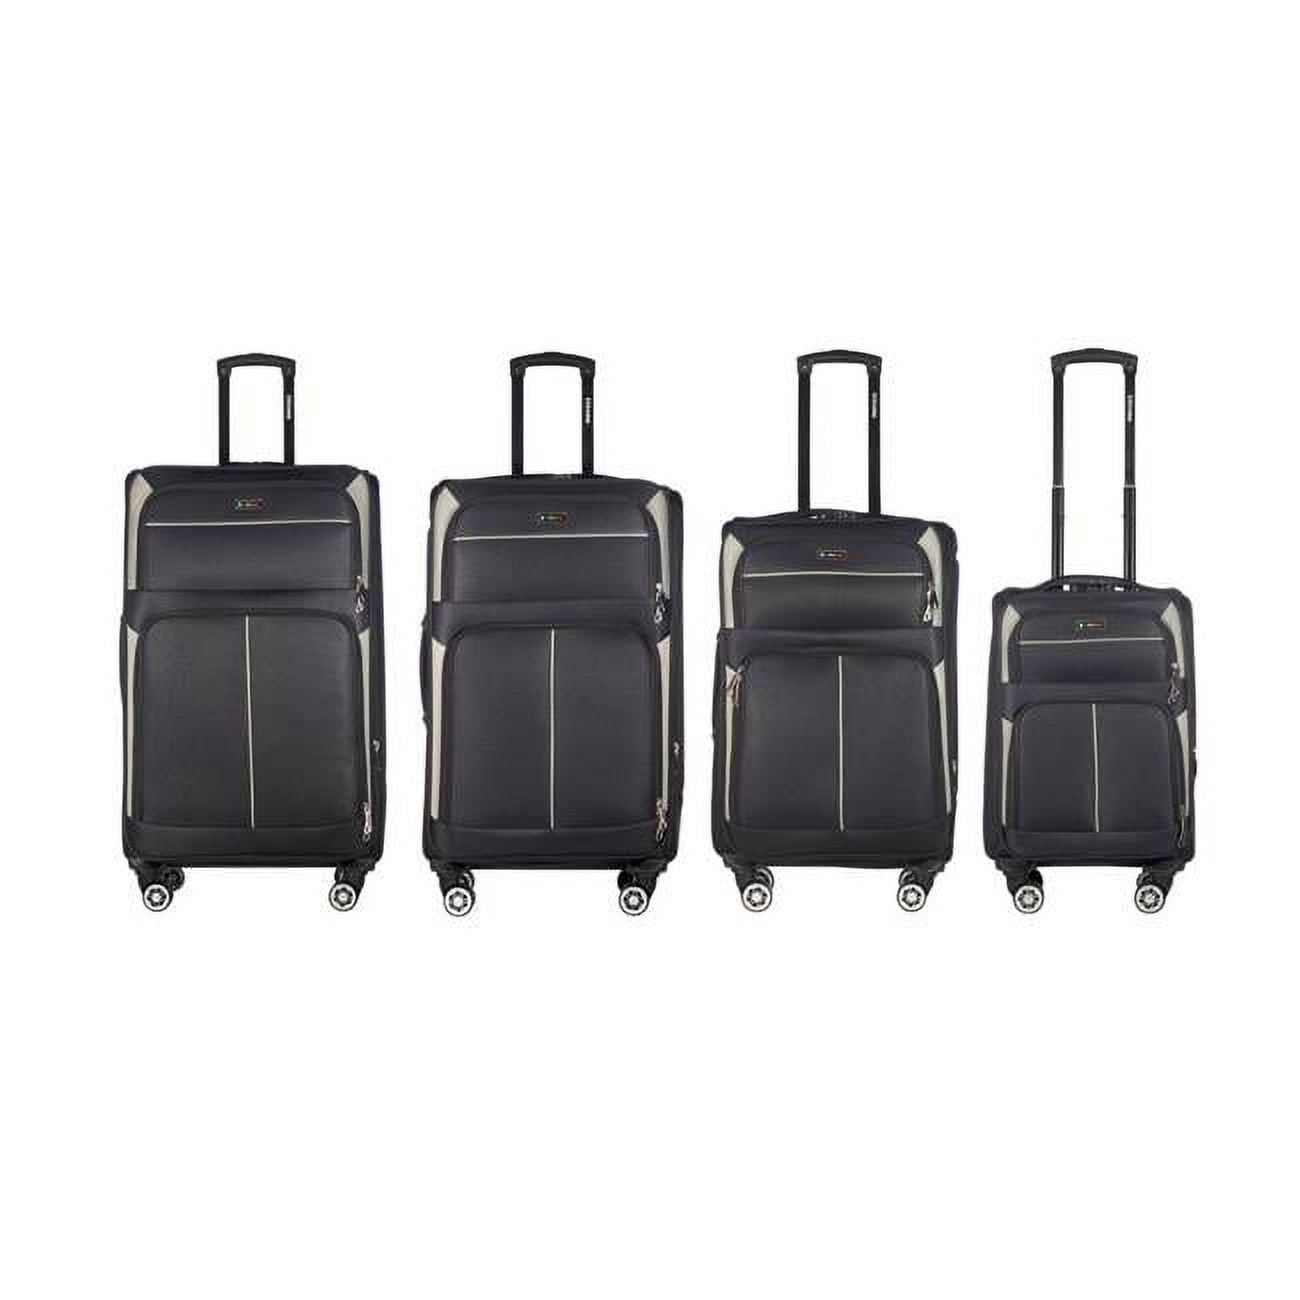 Picture of America&apos;s Travel Merchandise STAR-BLK-0598 Star collection black luggage Set(20/26/28/30&apos;)